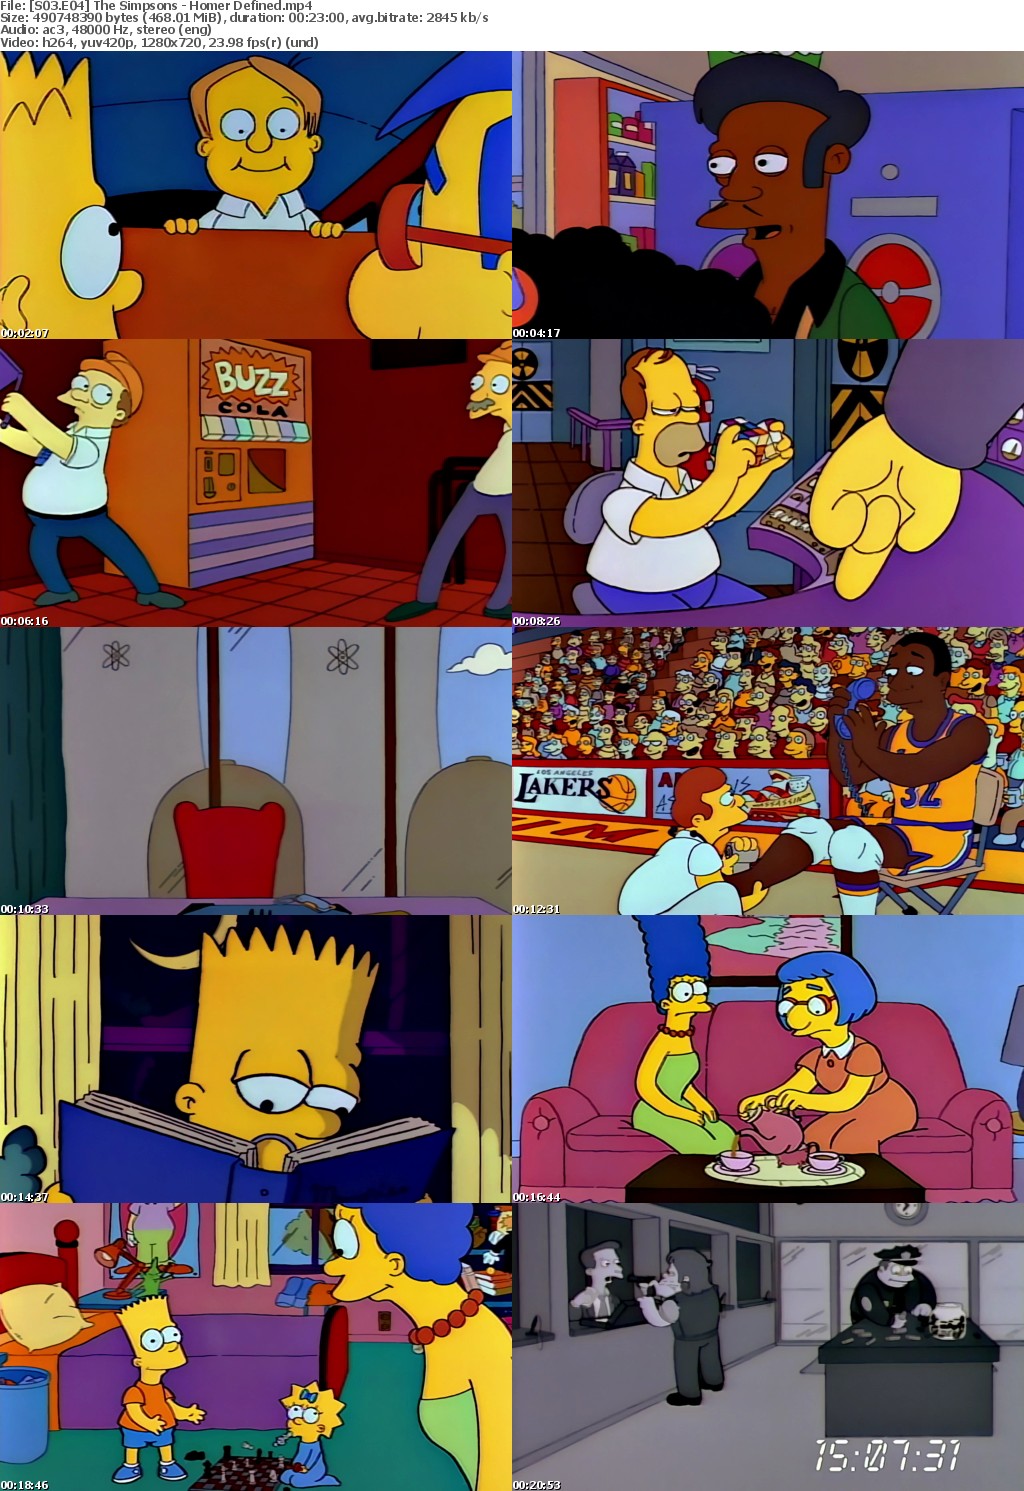 The Simpsons S3 E4 Homer Defined MP4 720p H264 WEBRip EzzRips